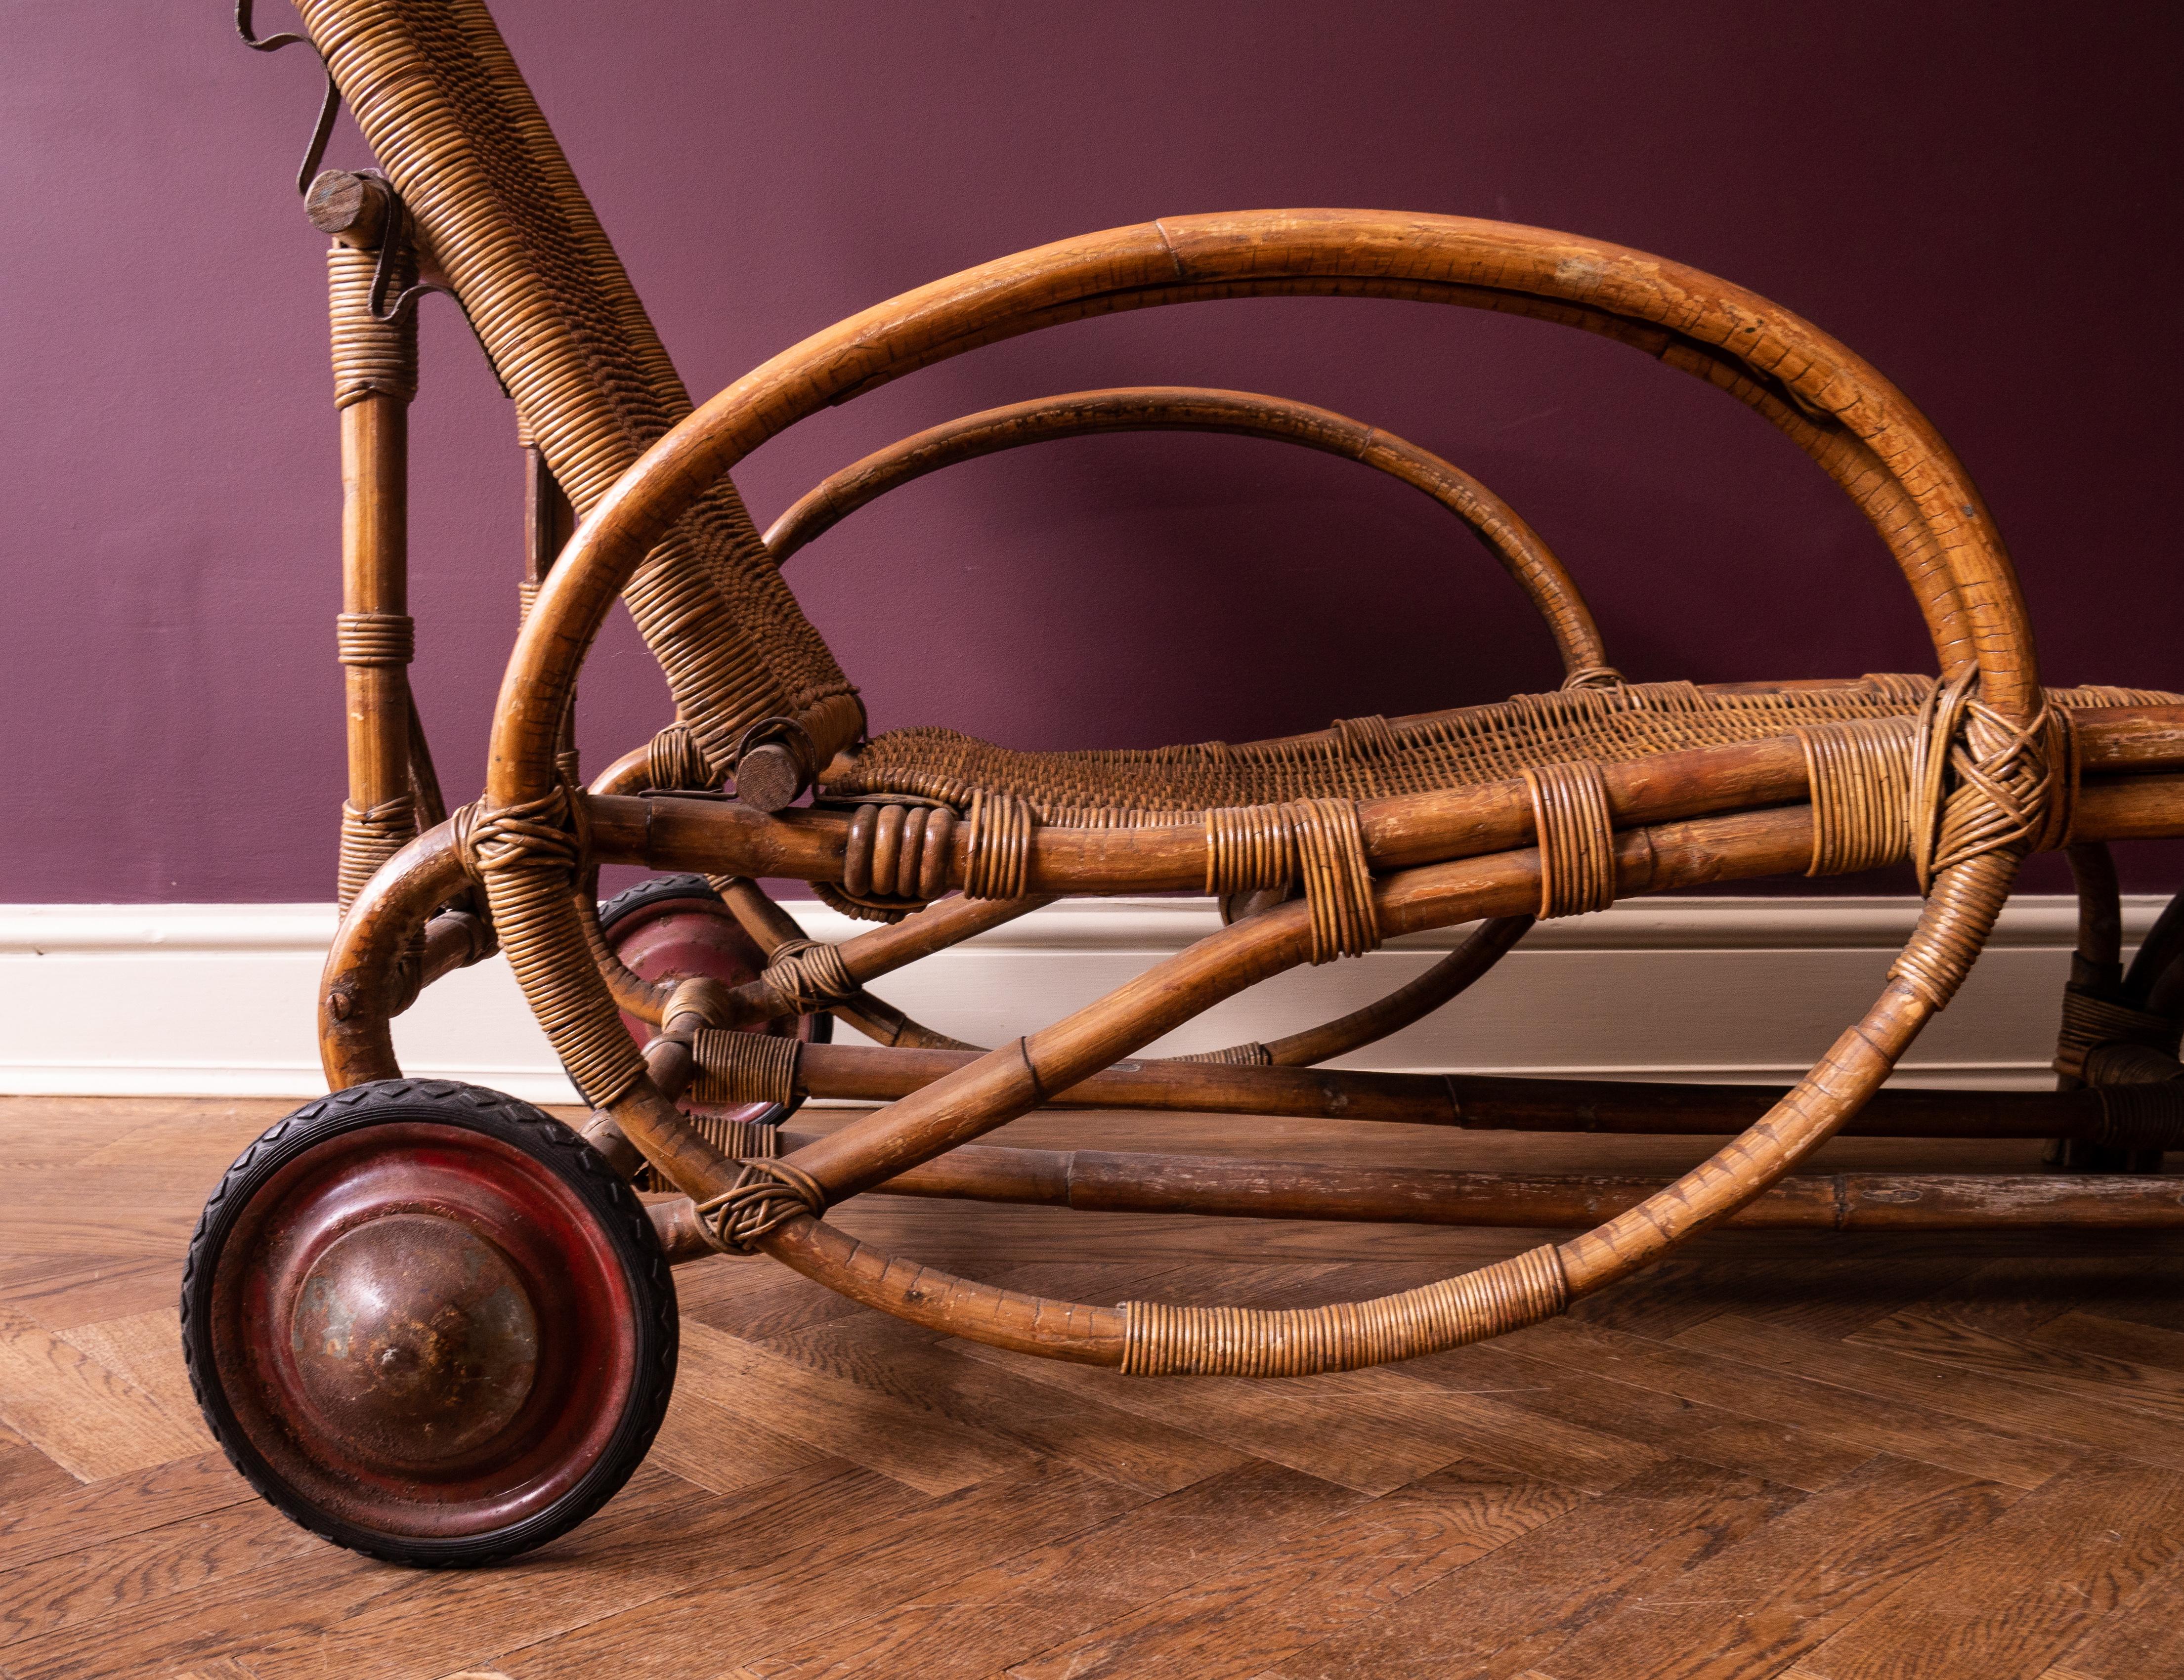 Definitive Bauhaus elegance, an iconic and rare collector piece in excellent original condition. Bentwood, woven cane, red enameled steel and rubber wheels.

Attributed to Erich Dieckmann
When the Bauhaus school moved to Dessau in 1925, Erich